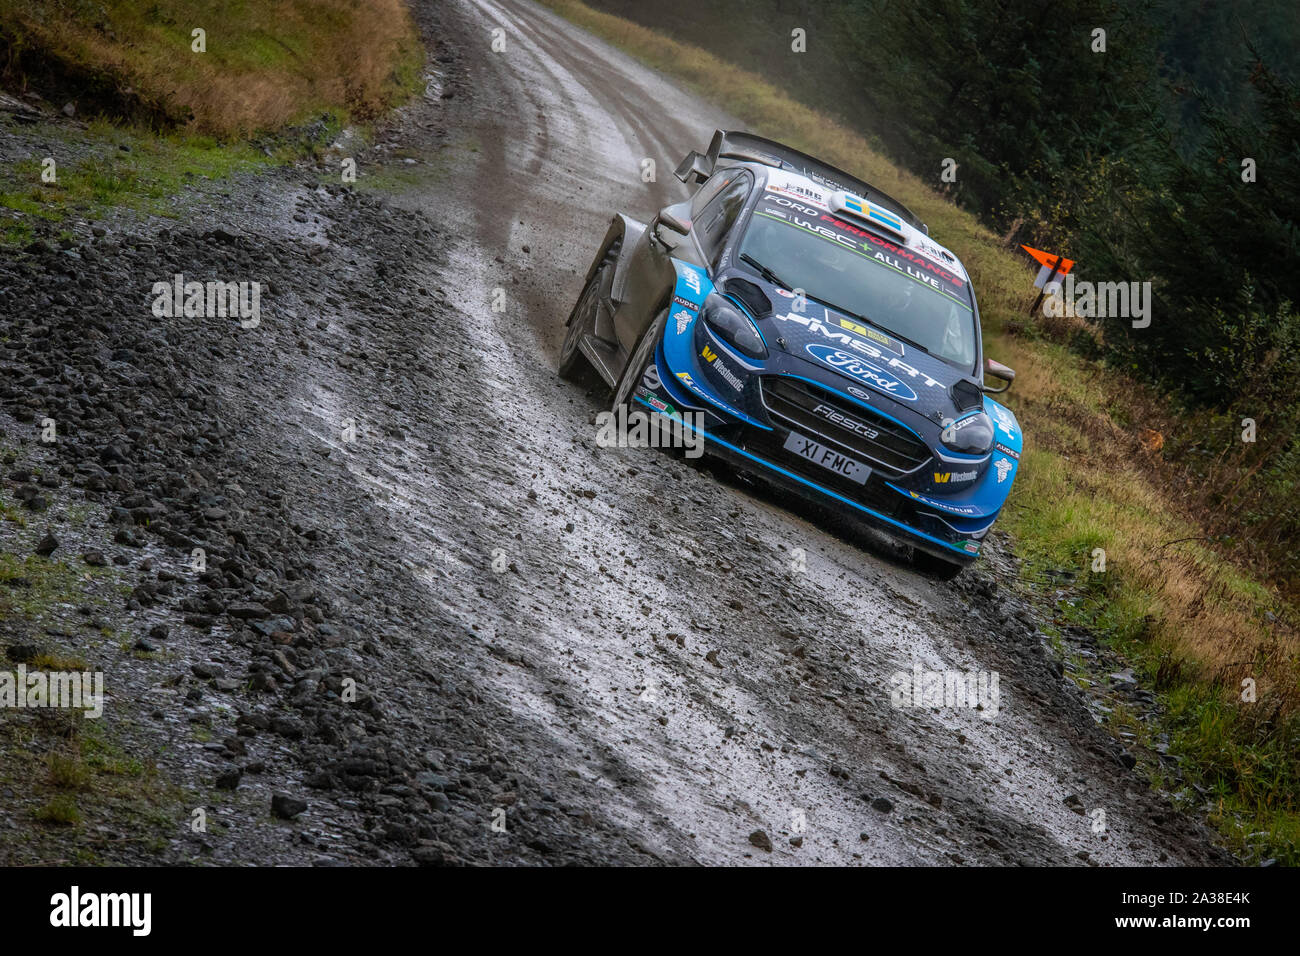 Ford Fiesta Wrc High Resolution Stock Photography And Images Alamy